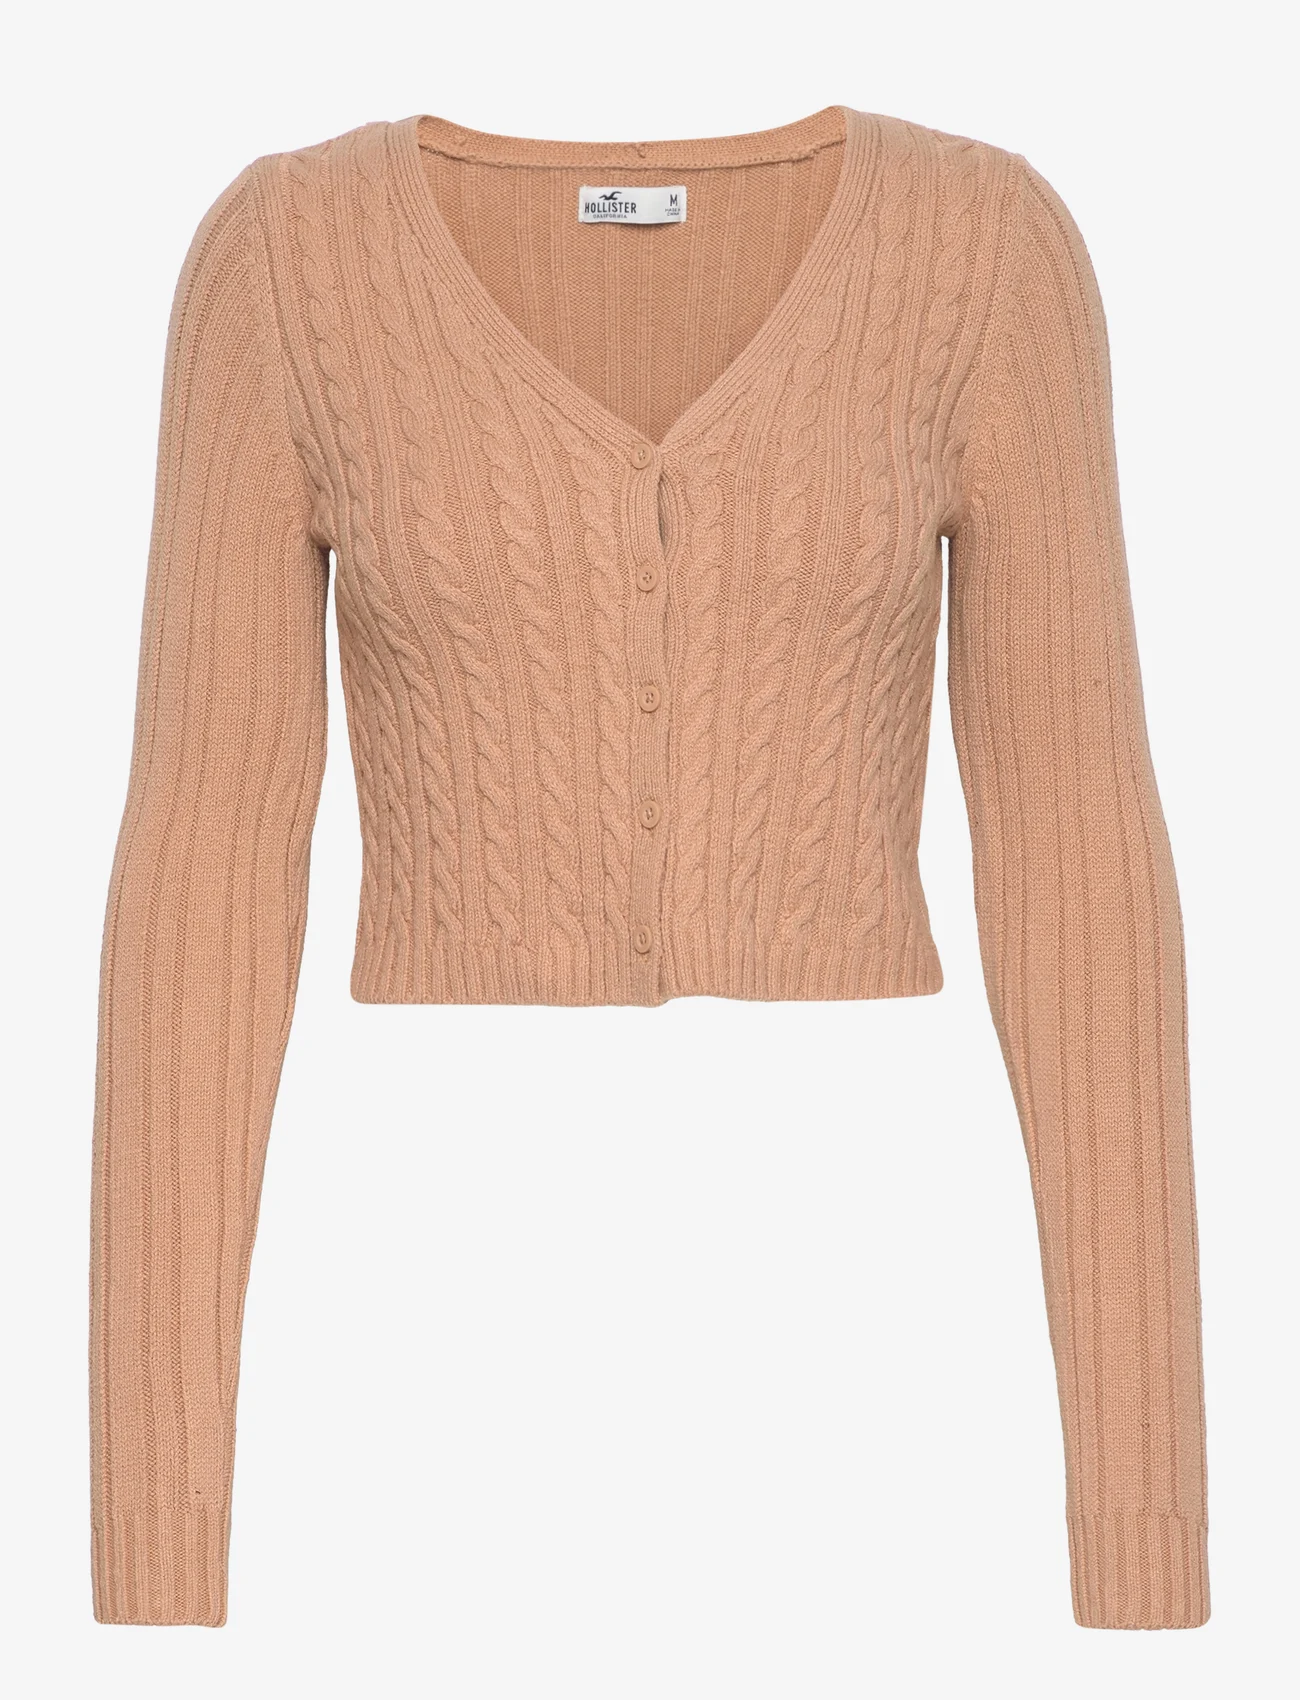 Hollister - HCo. GIRLS SWEATERS - neuletakit - tan brown solid cable - 0